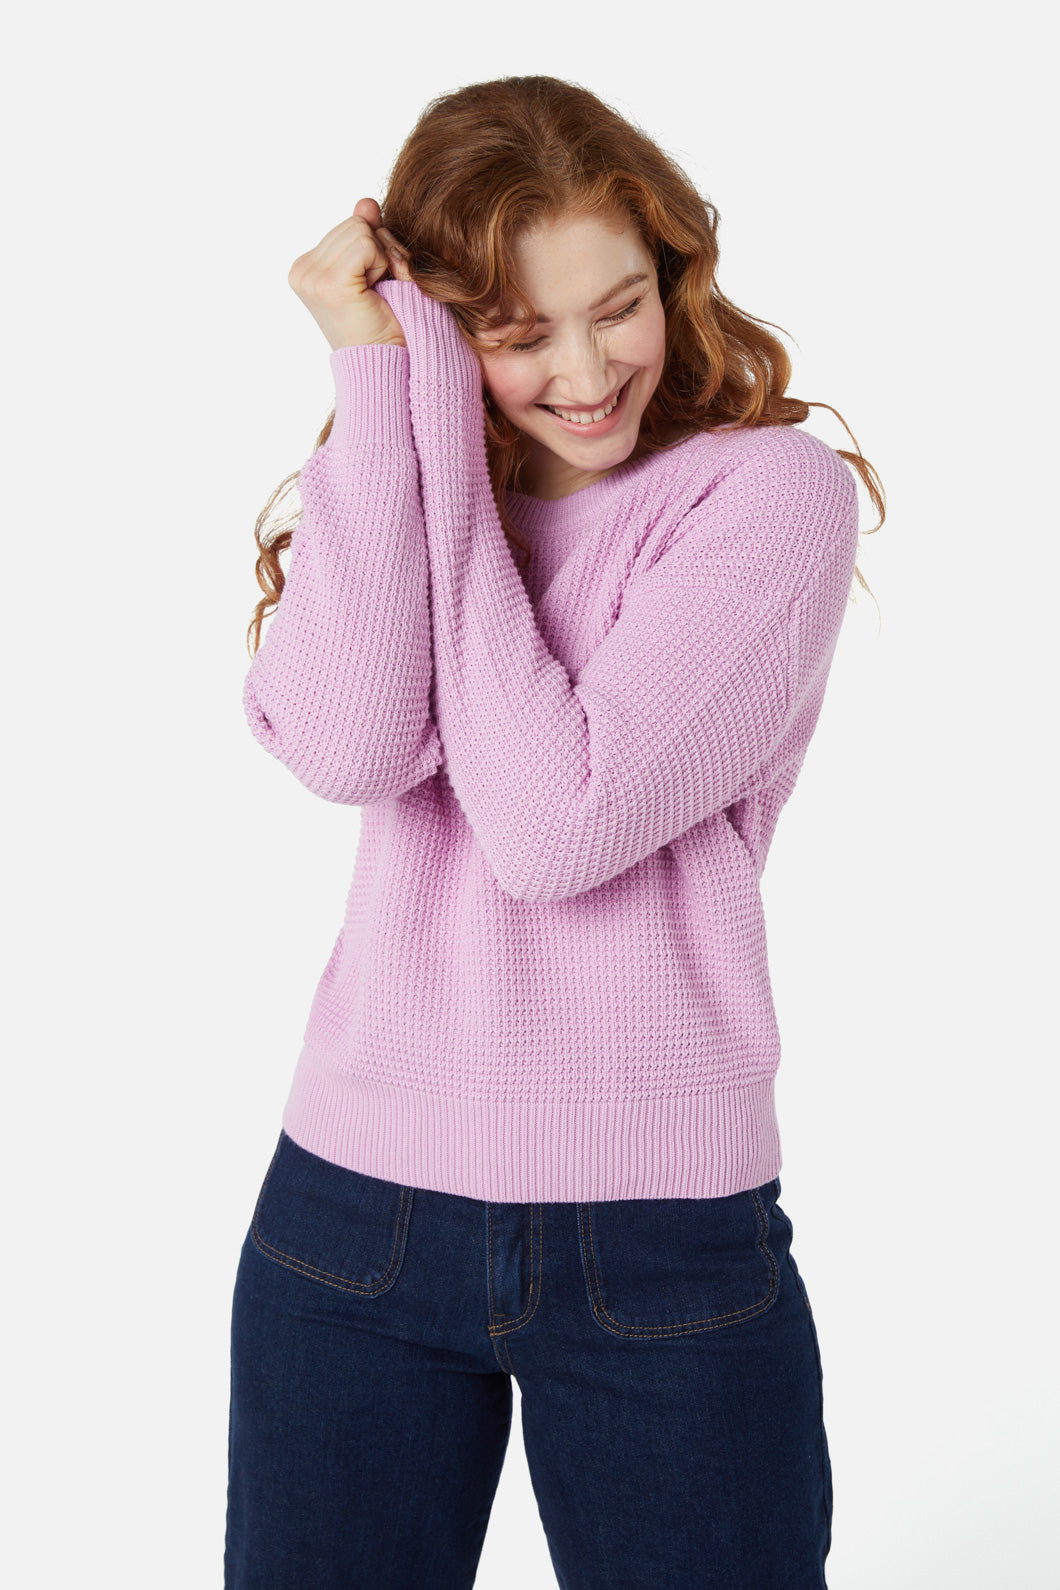 FEATHER WAFFLE KNIT SWEATER - PURPLE – VIC APPAREL